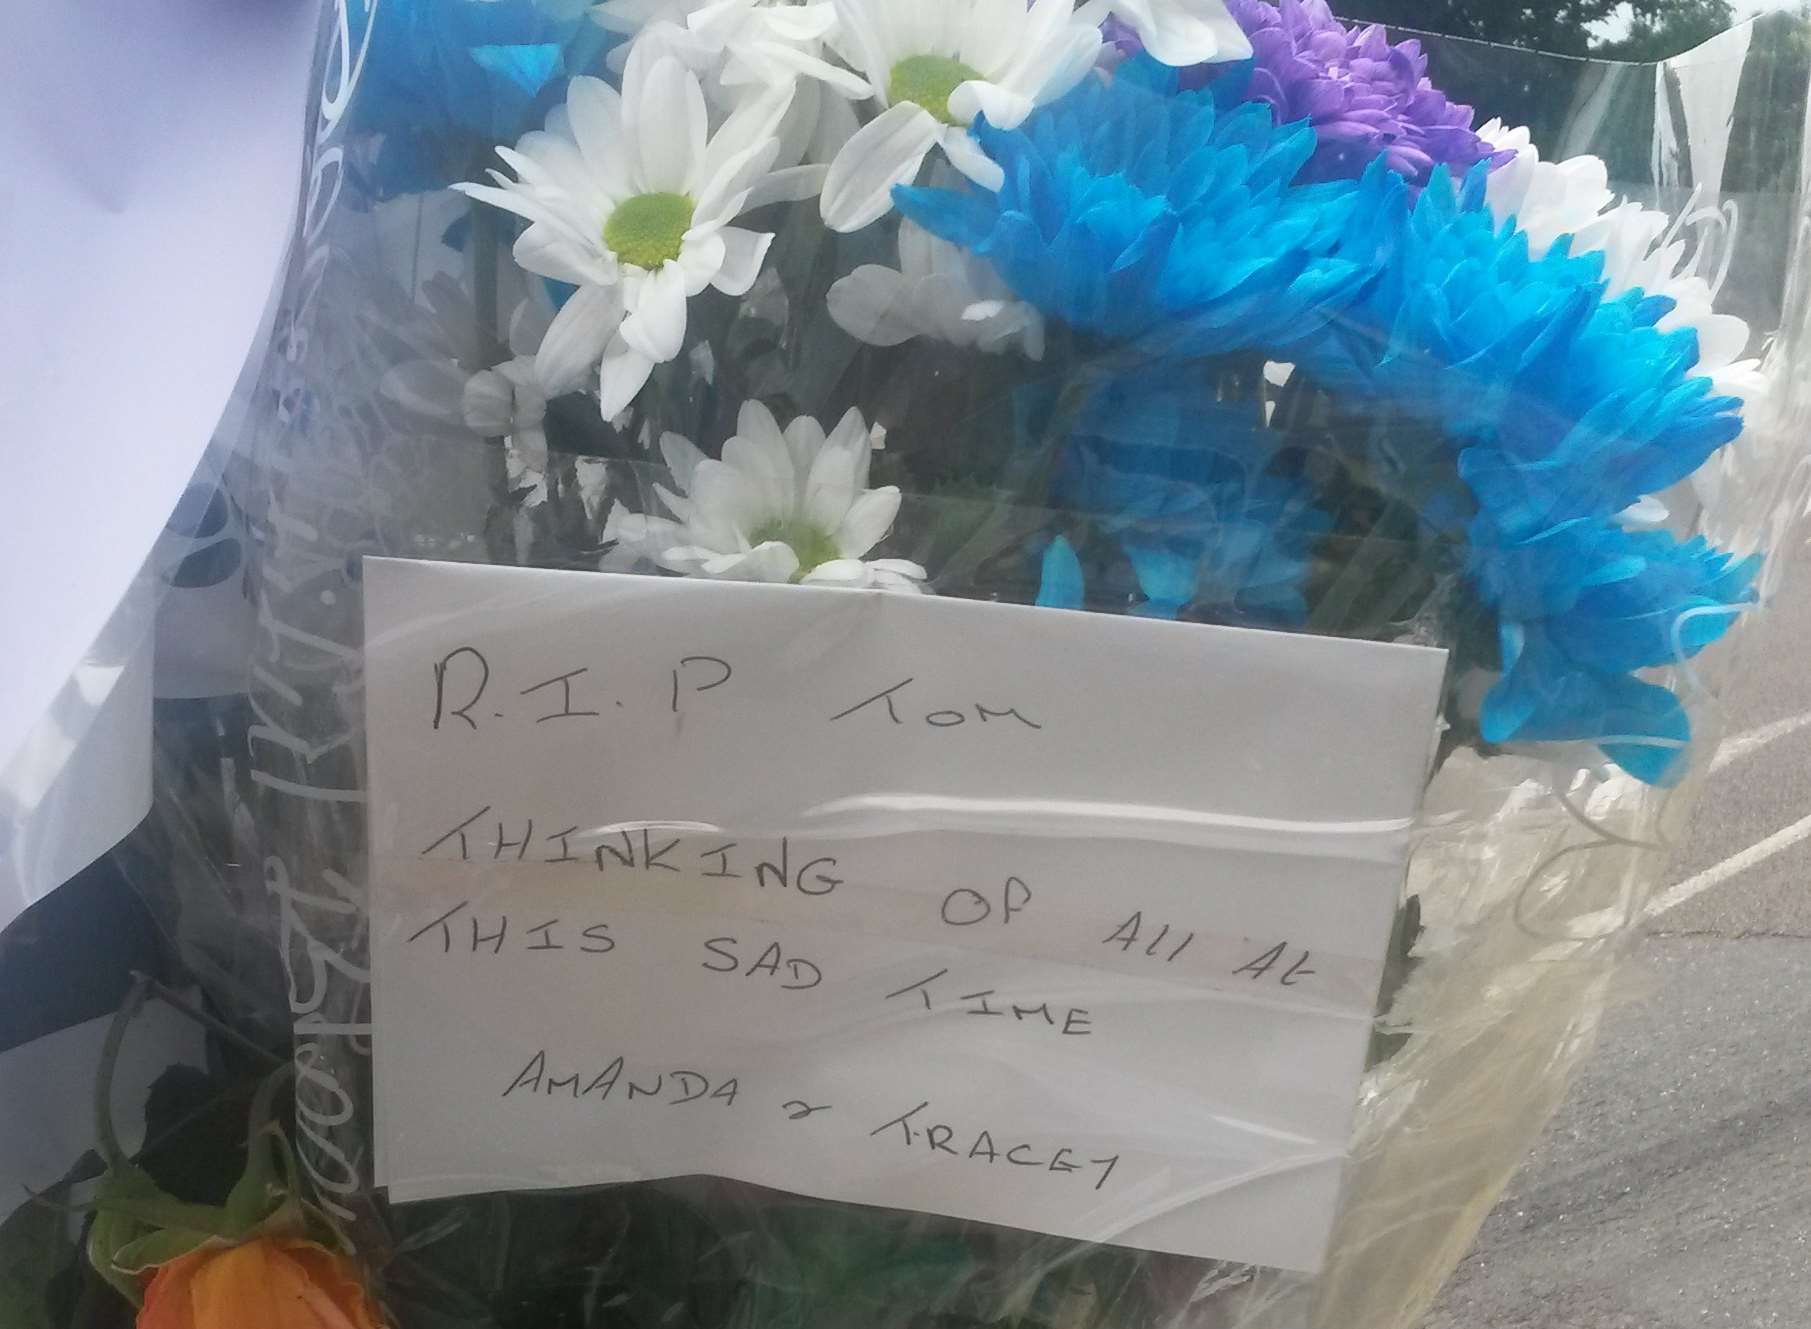 Floral tributes left in memory by Amanda and Tracey